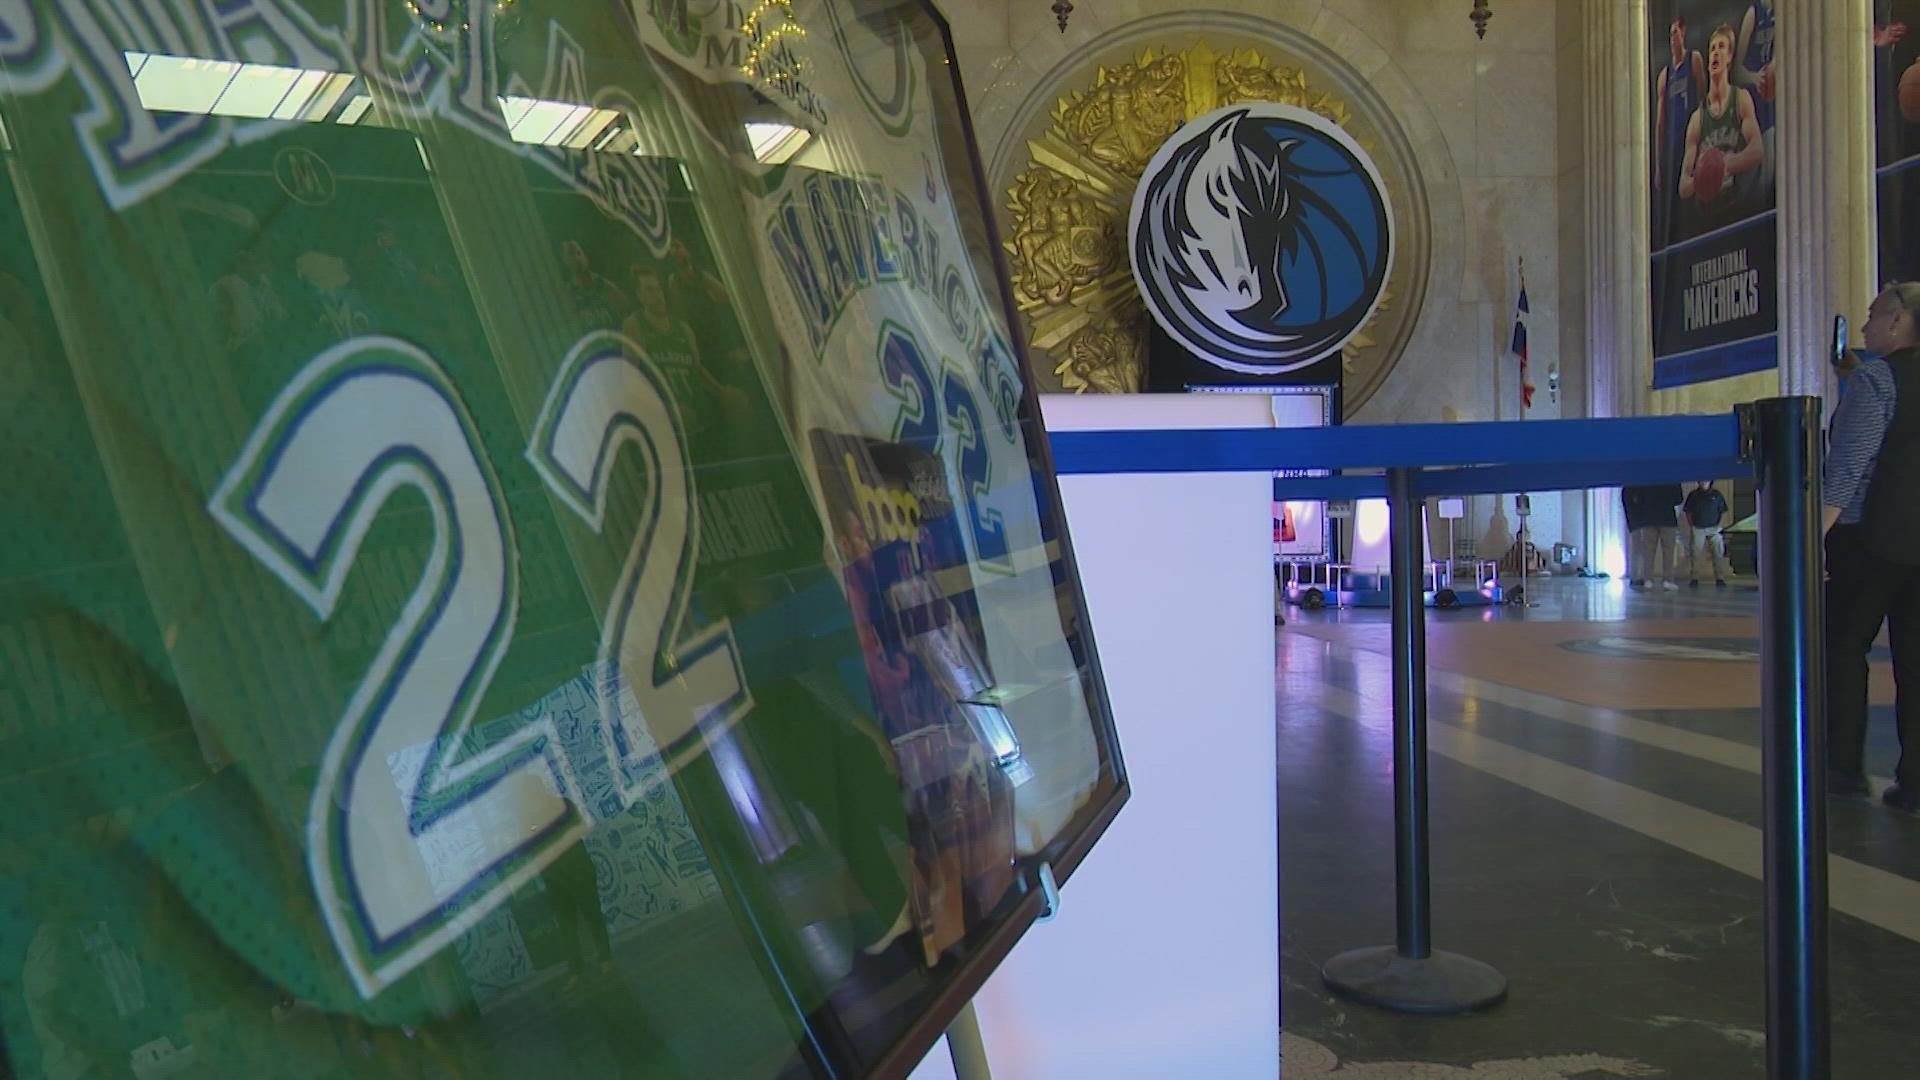 The Mavs Vault highlights the 42-year history of the North Texas team through aspects such as interactive experiences and never-before-seen historical artifacts.